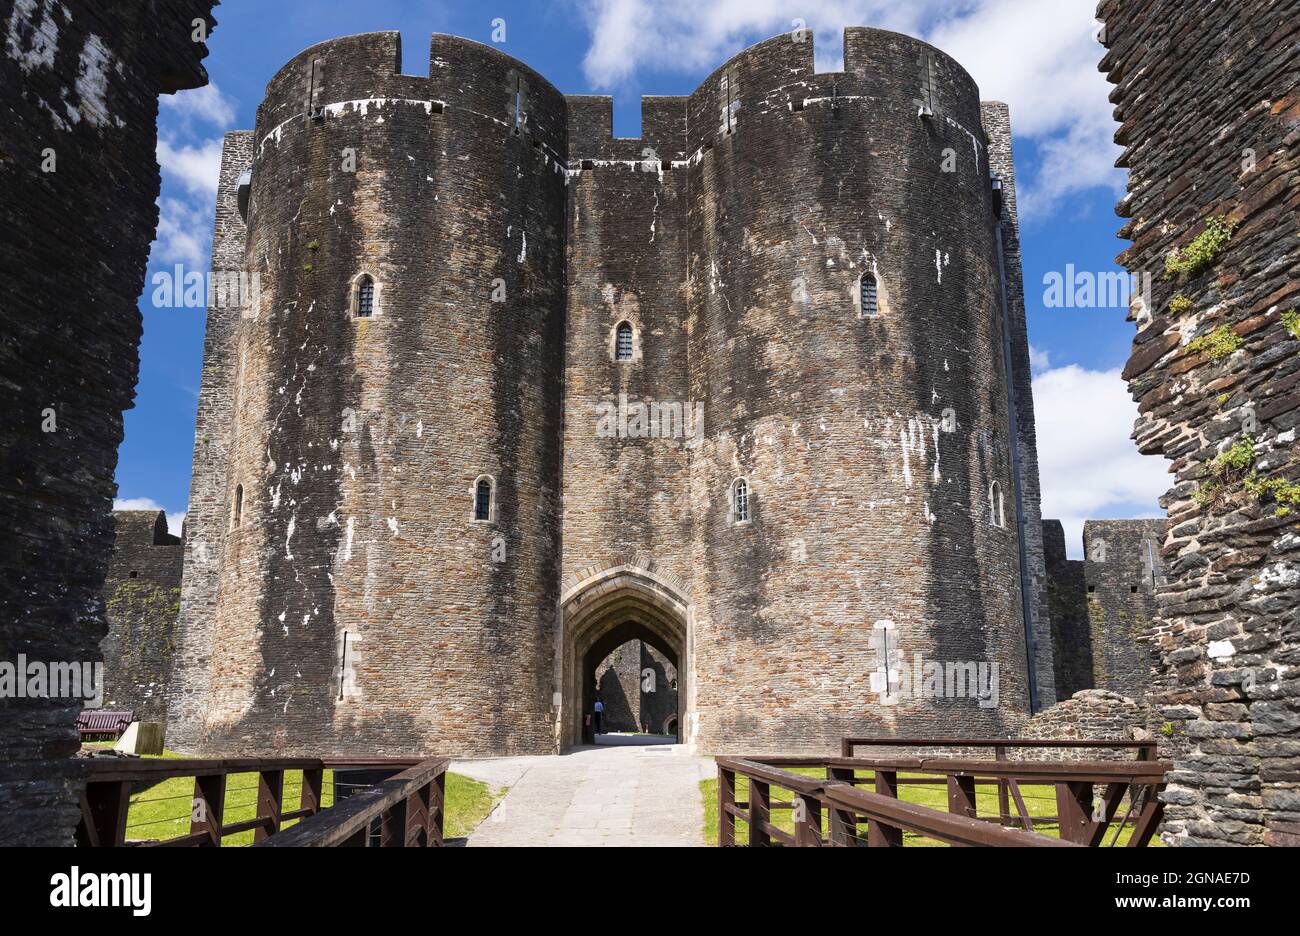 The inner east gatehouse at Caerphilly Castle, South Wales, UK/ Stock Photo